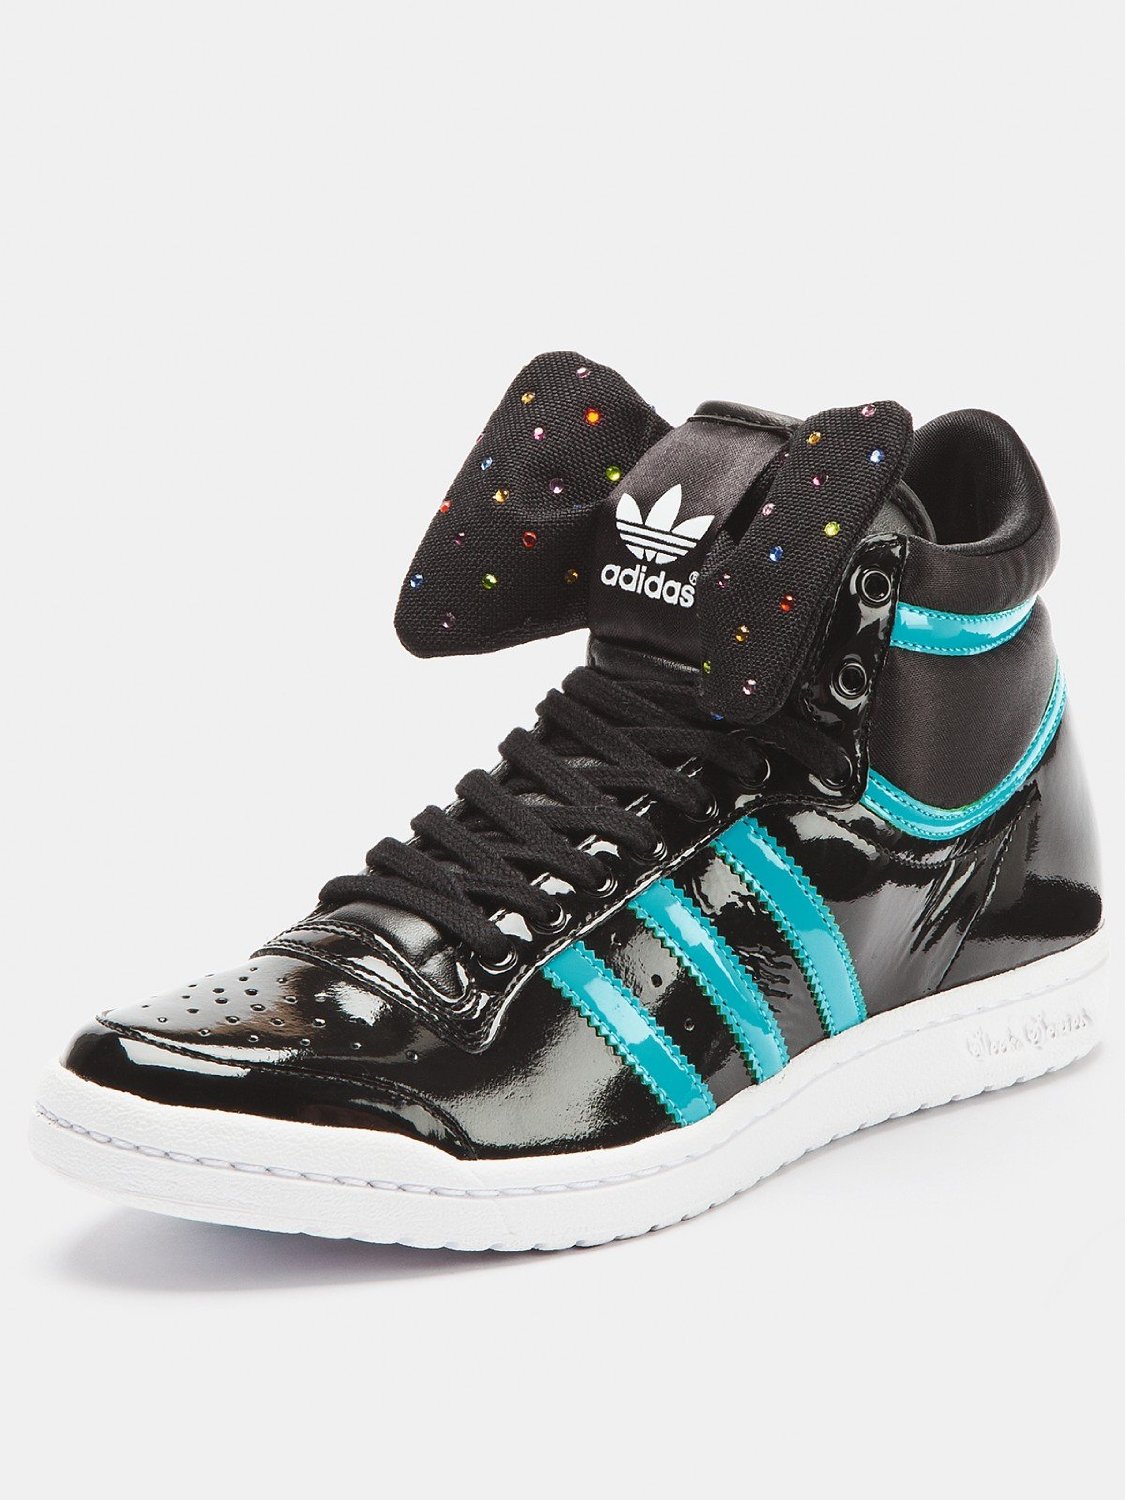 Snazzy Sneakers: Adidas Black, Blue, and White High Tops